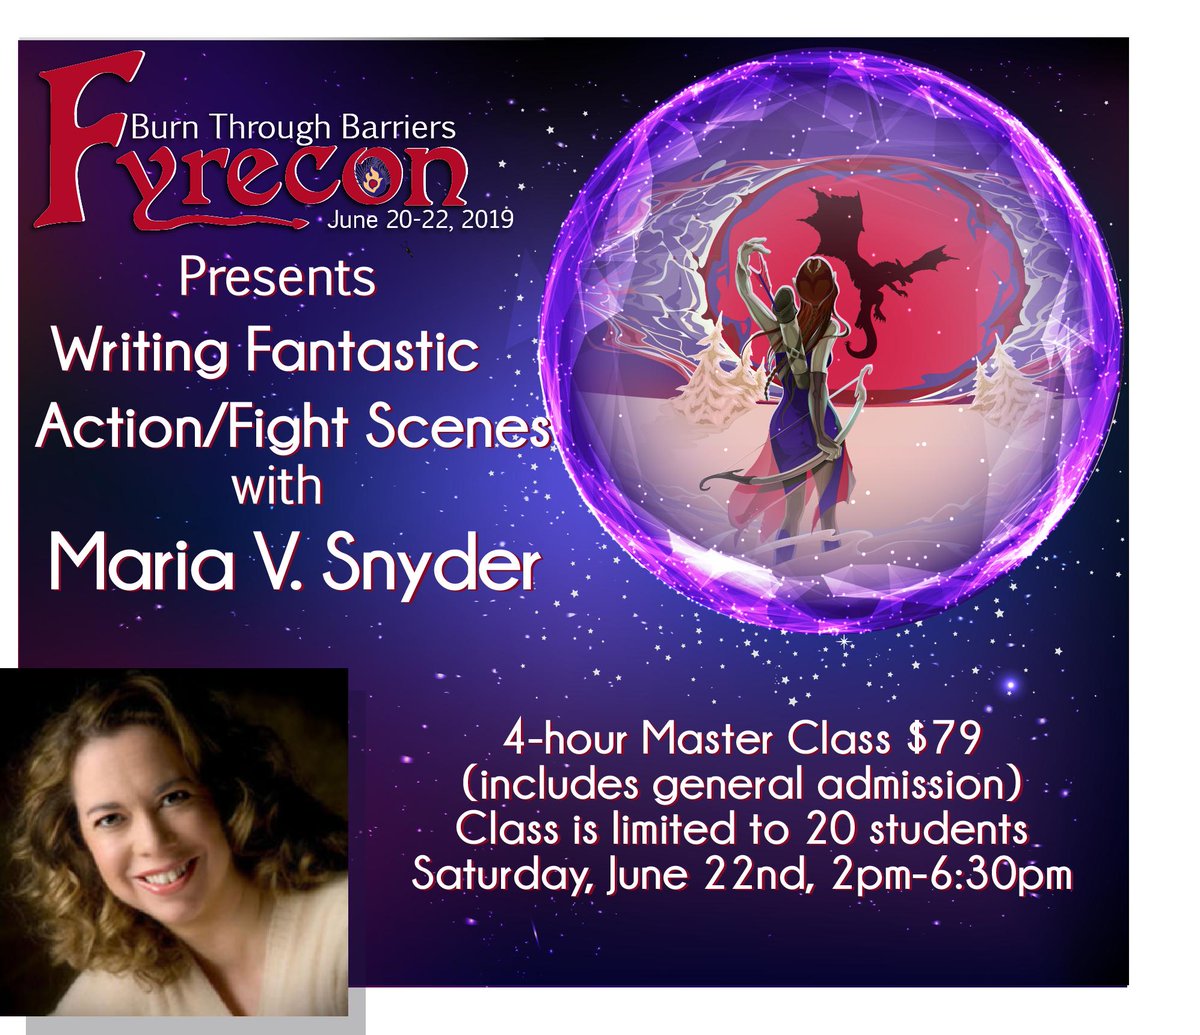 The Master classes are open. Grab your spot now to learn from New York Times Best-selling YA Author Maria V. Snyder⠀
⠀
Sign up before the all spots are gone: fyrecon.com/maria-v-snyder…
#masterclass  #writingconferences  #Writingmasterclass
#fyrecon3